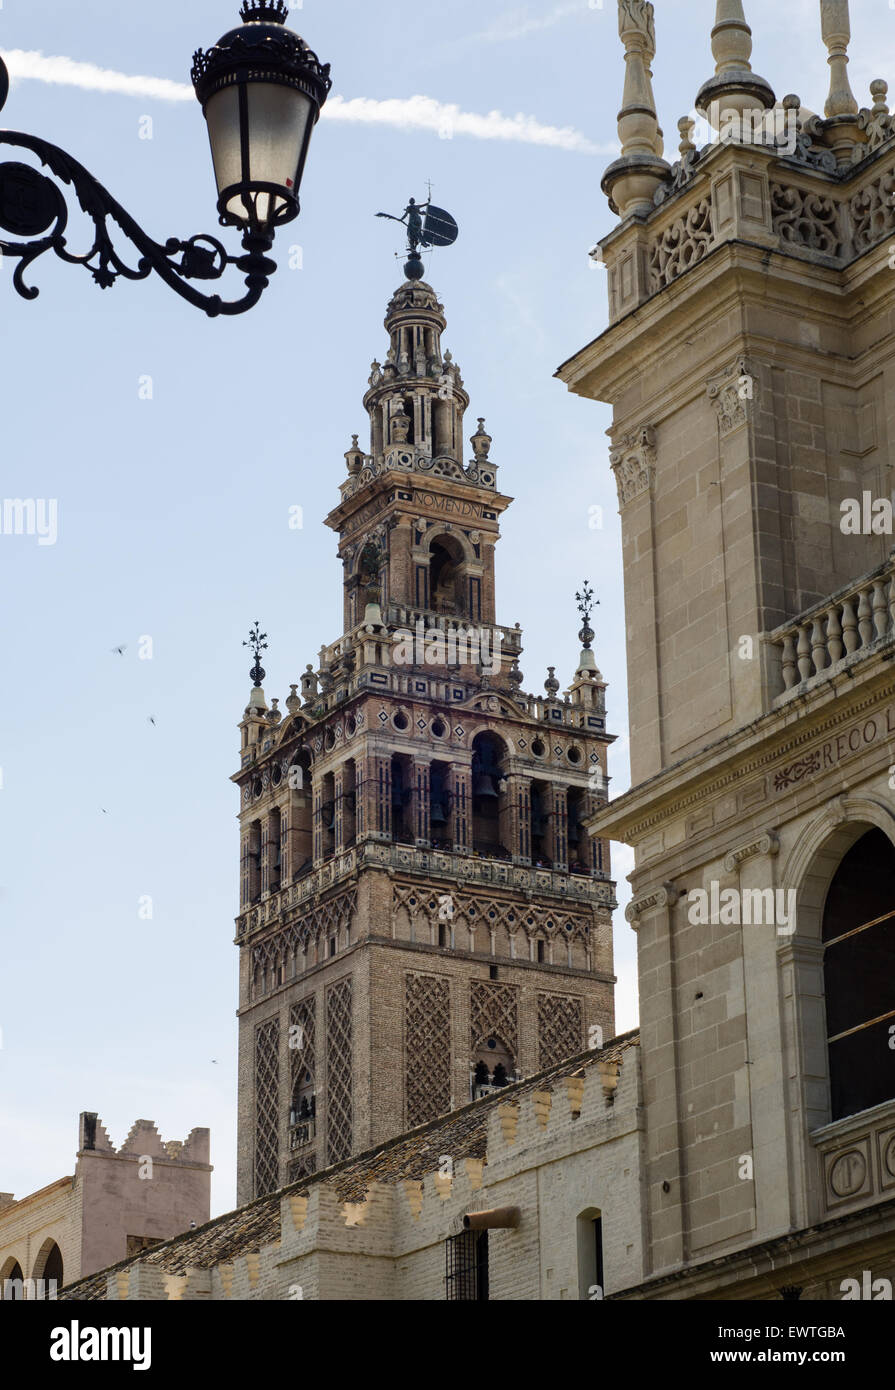 La Giralda, the bell tower of the Cathedral of Seville, Spain, one of the largest churches in the world and an amazing example of Almohad architecture Stock Photo